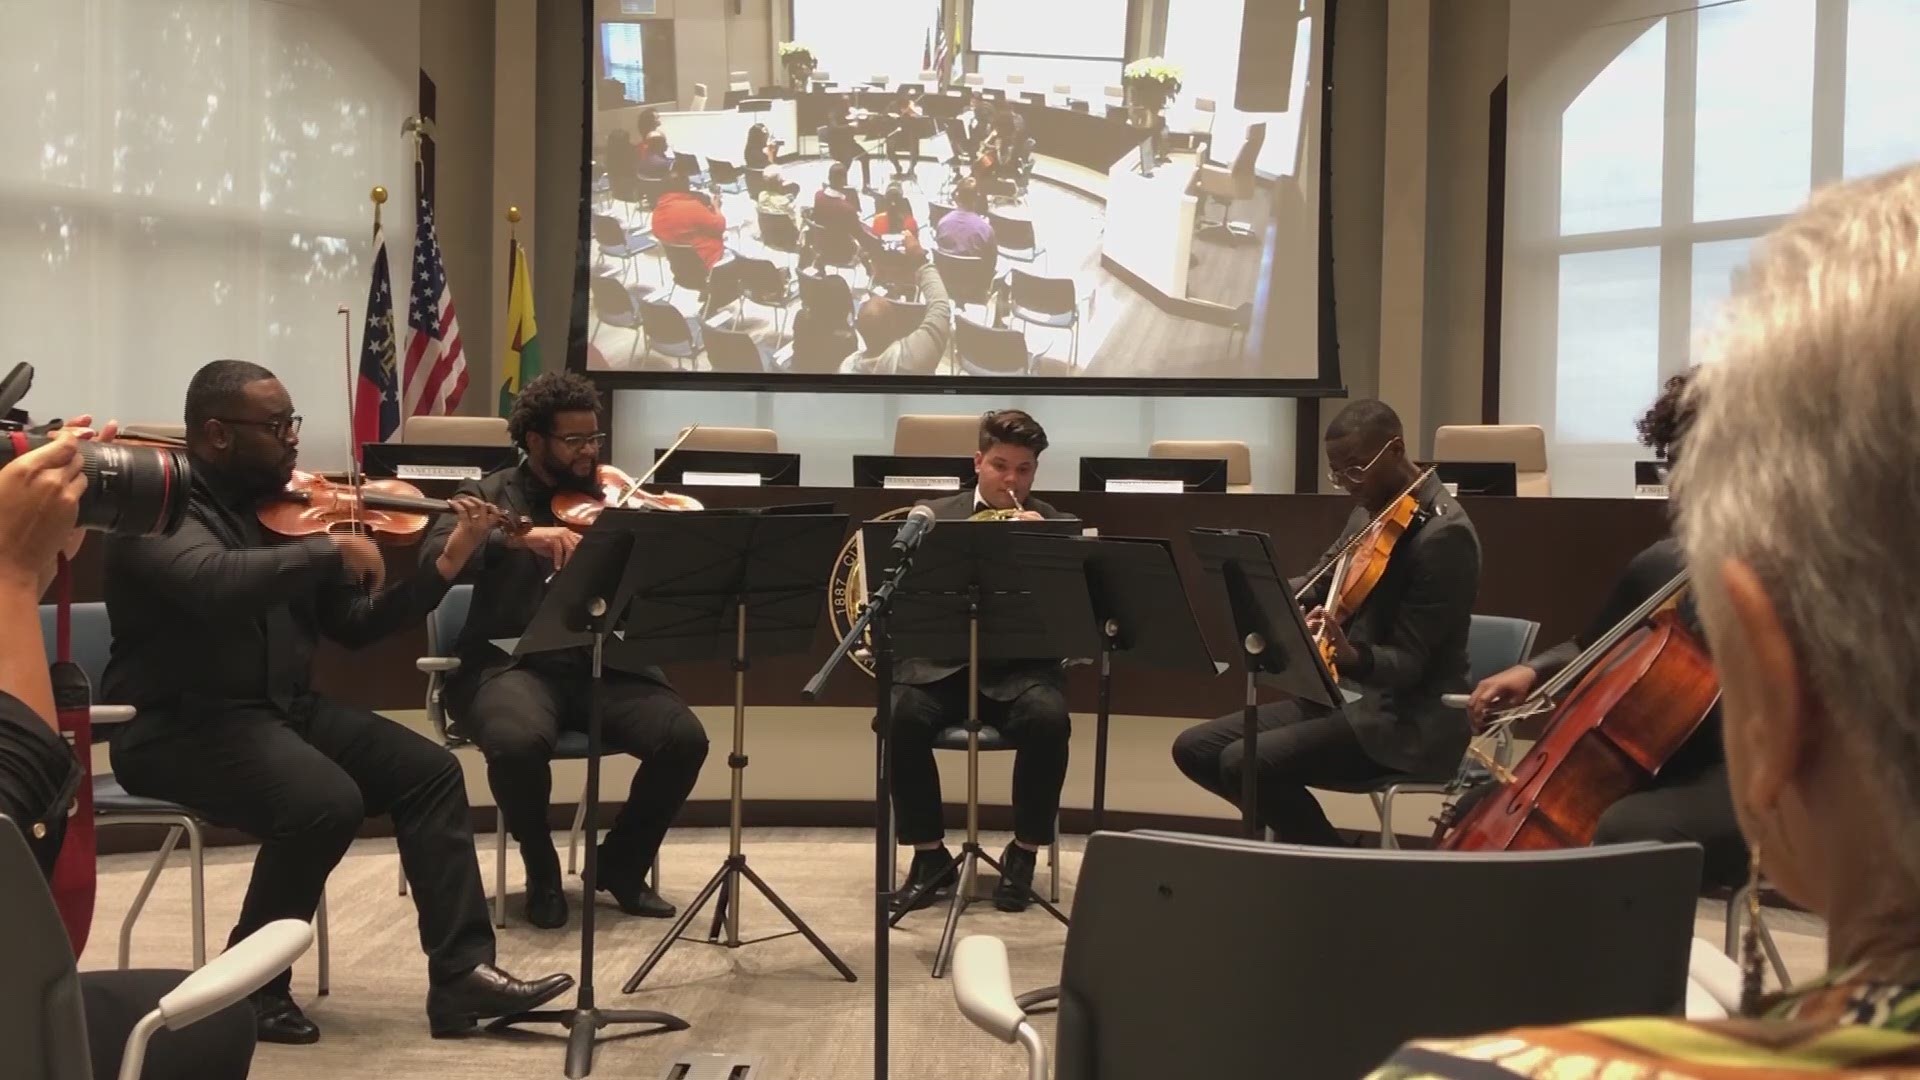 As part of the launch for its Public Art Program Initiative, the city hosted Chamber Music at ‘The Point’